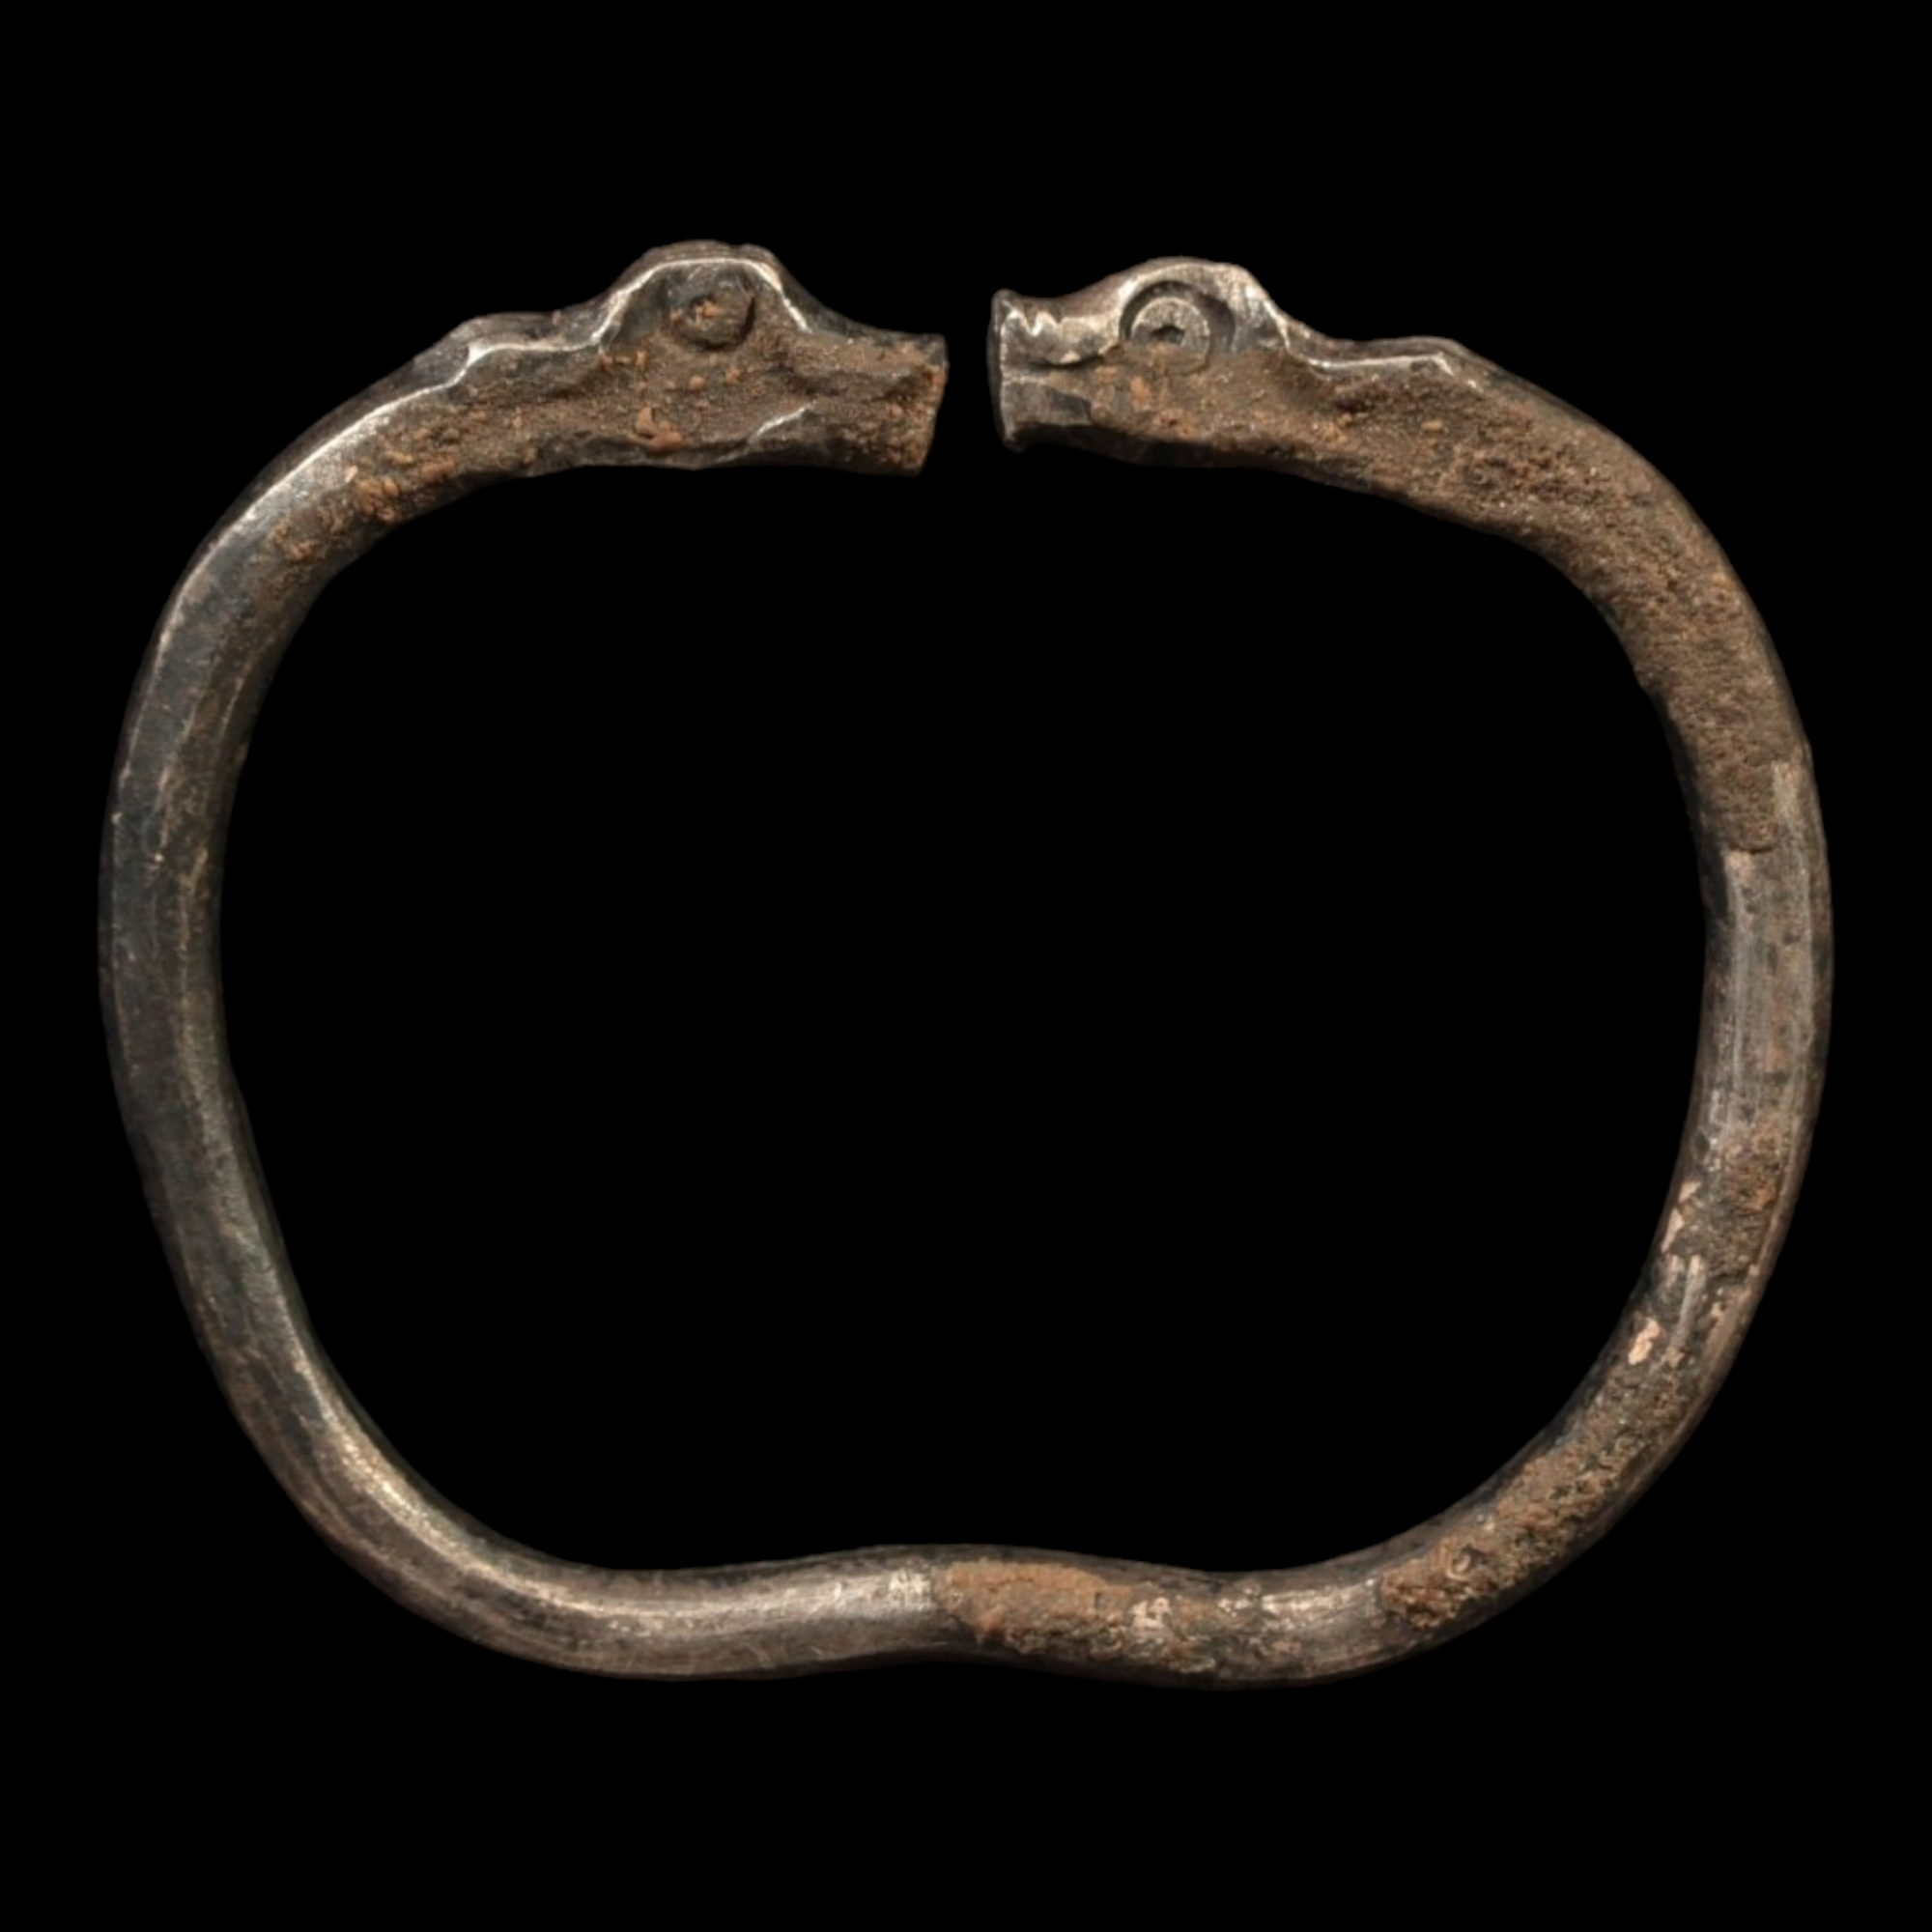 Achaemenid Empire, Goat Headed Silver Bracelet, Child Sized (49mm, 15.51g) - c. 530 to 350 BCE - Ancient Persia